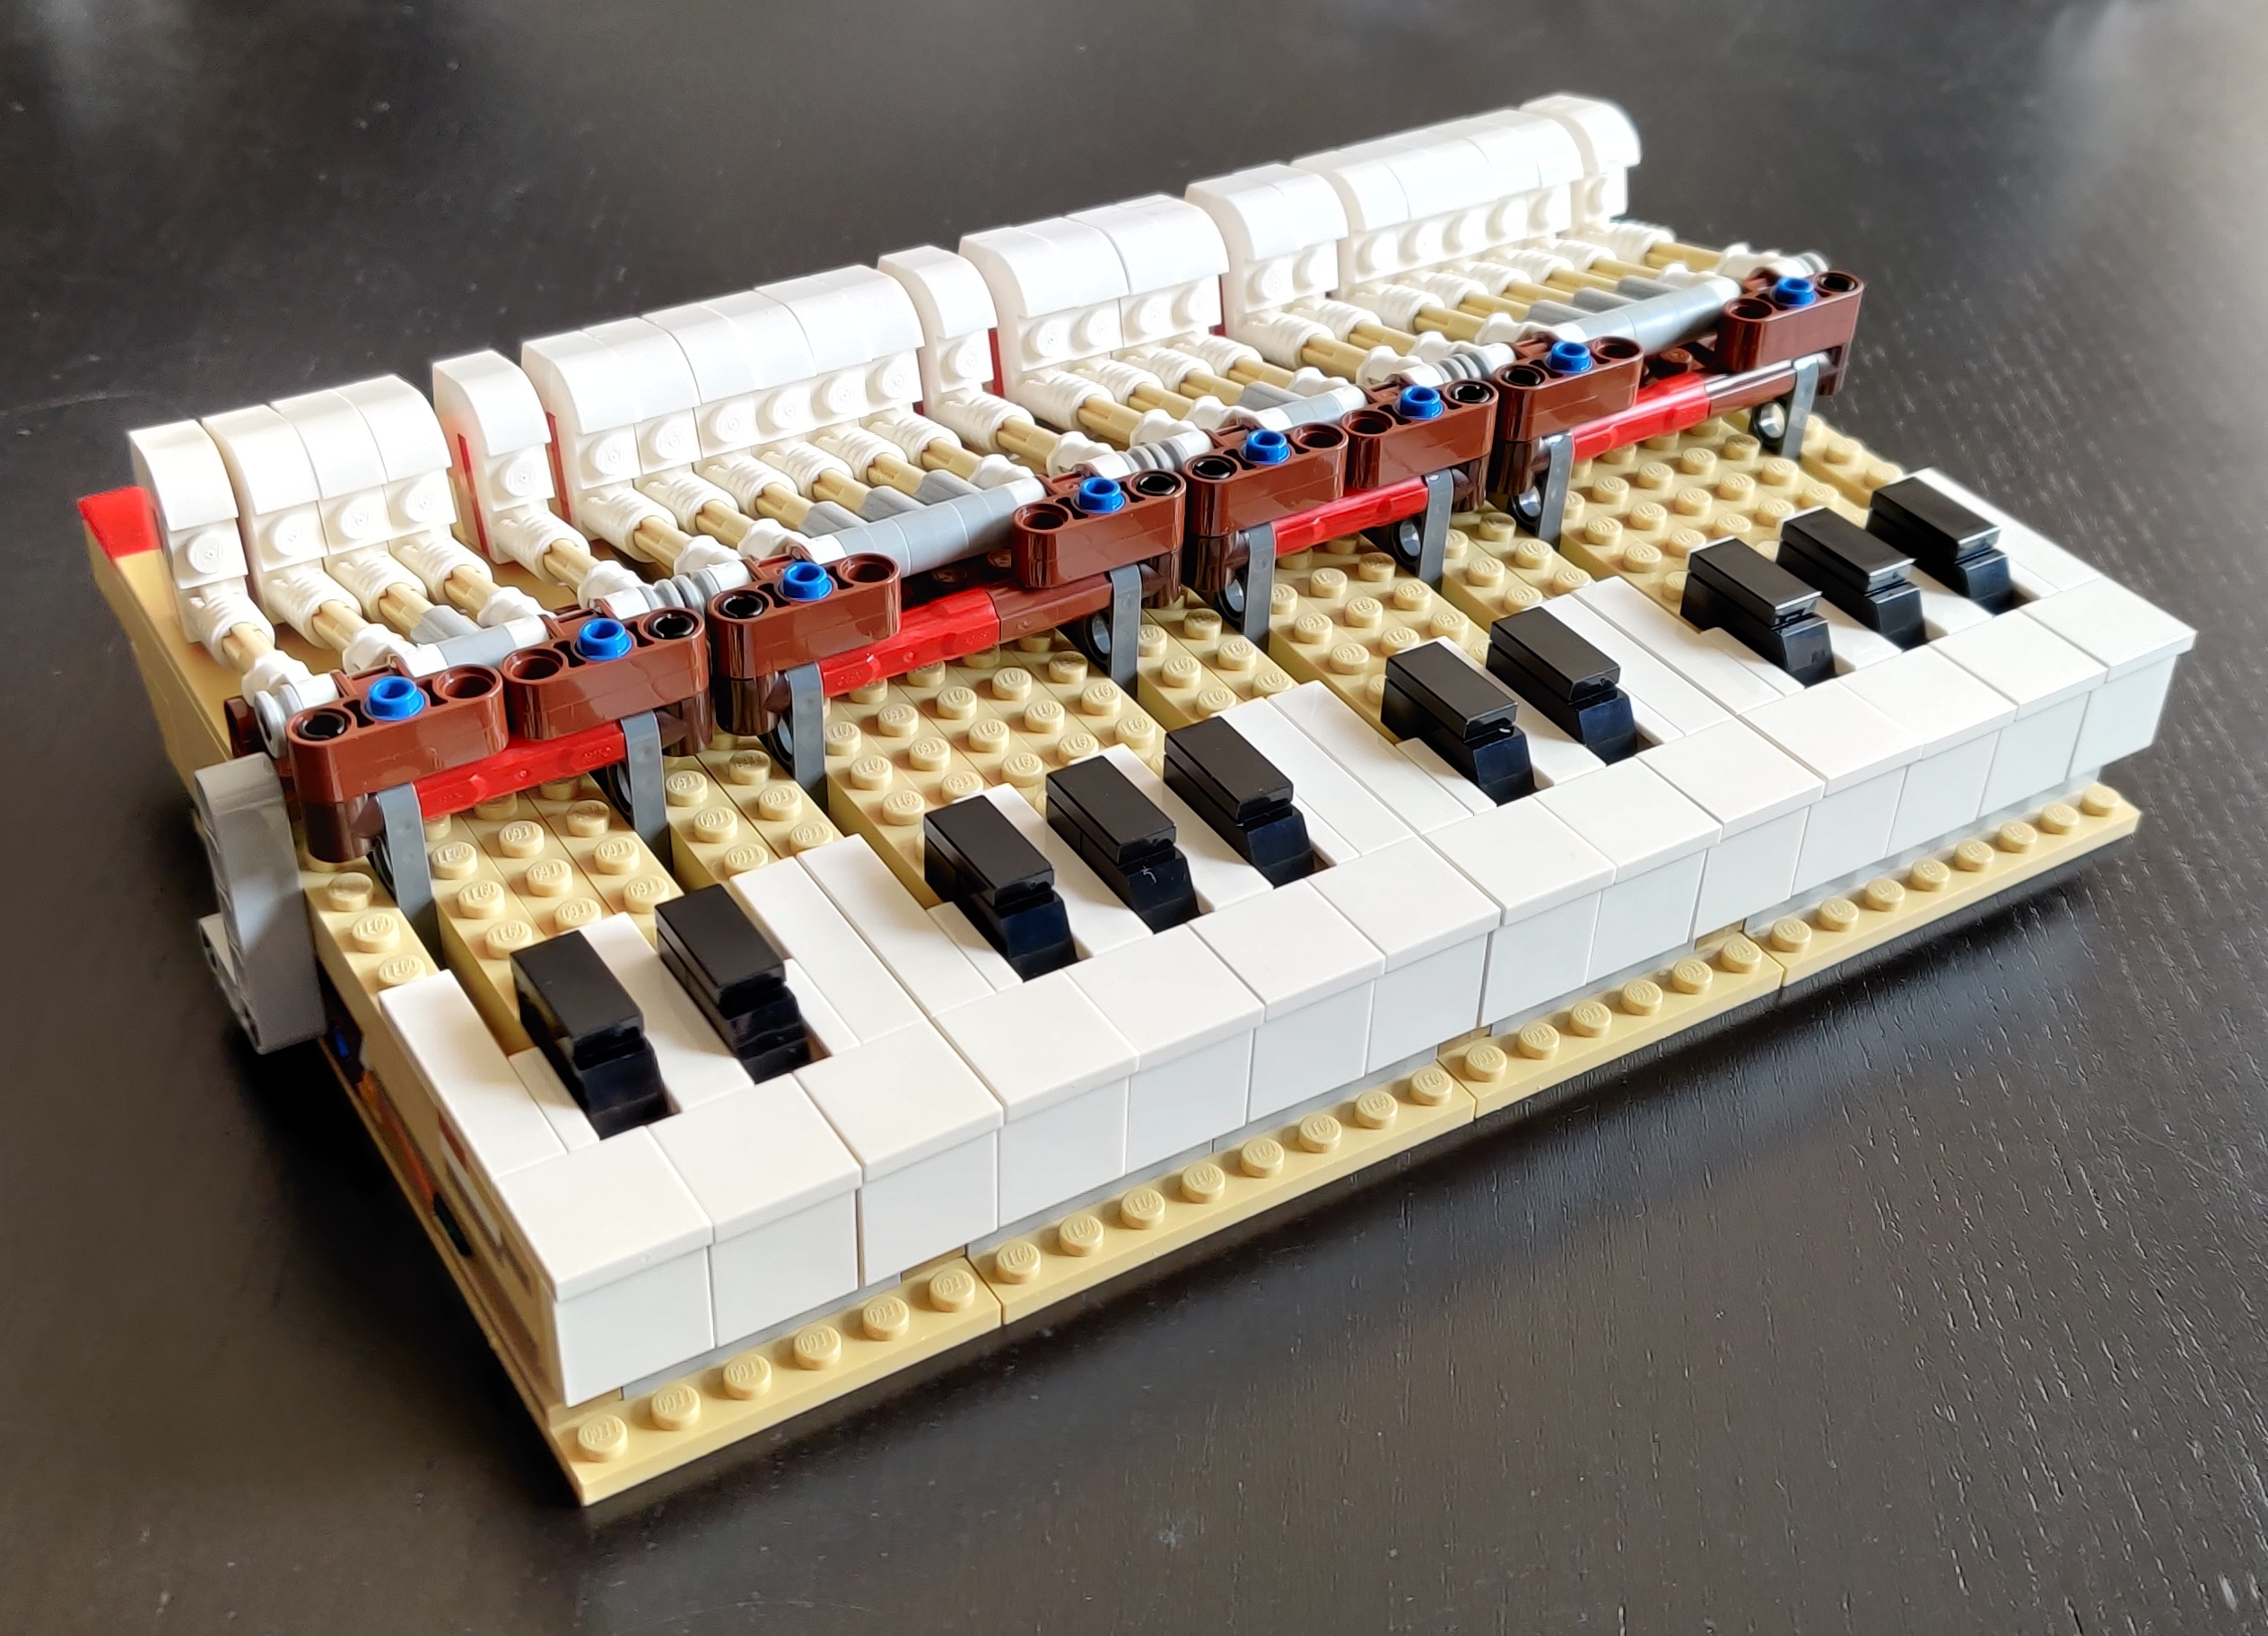 the full keyboard of the Lego piano, 2 octaves + 1, with
correctly-alternating white and black keys, each key has a
matching hammer